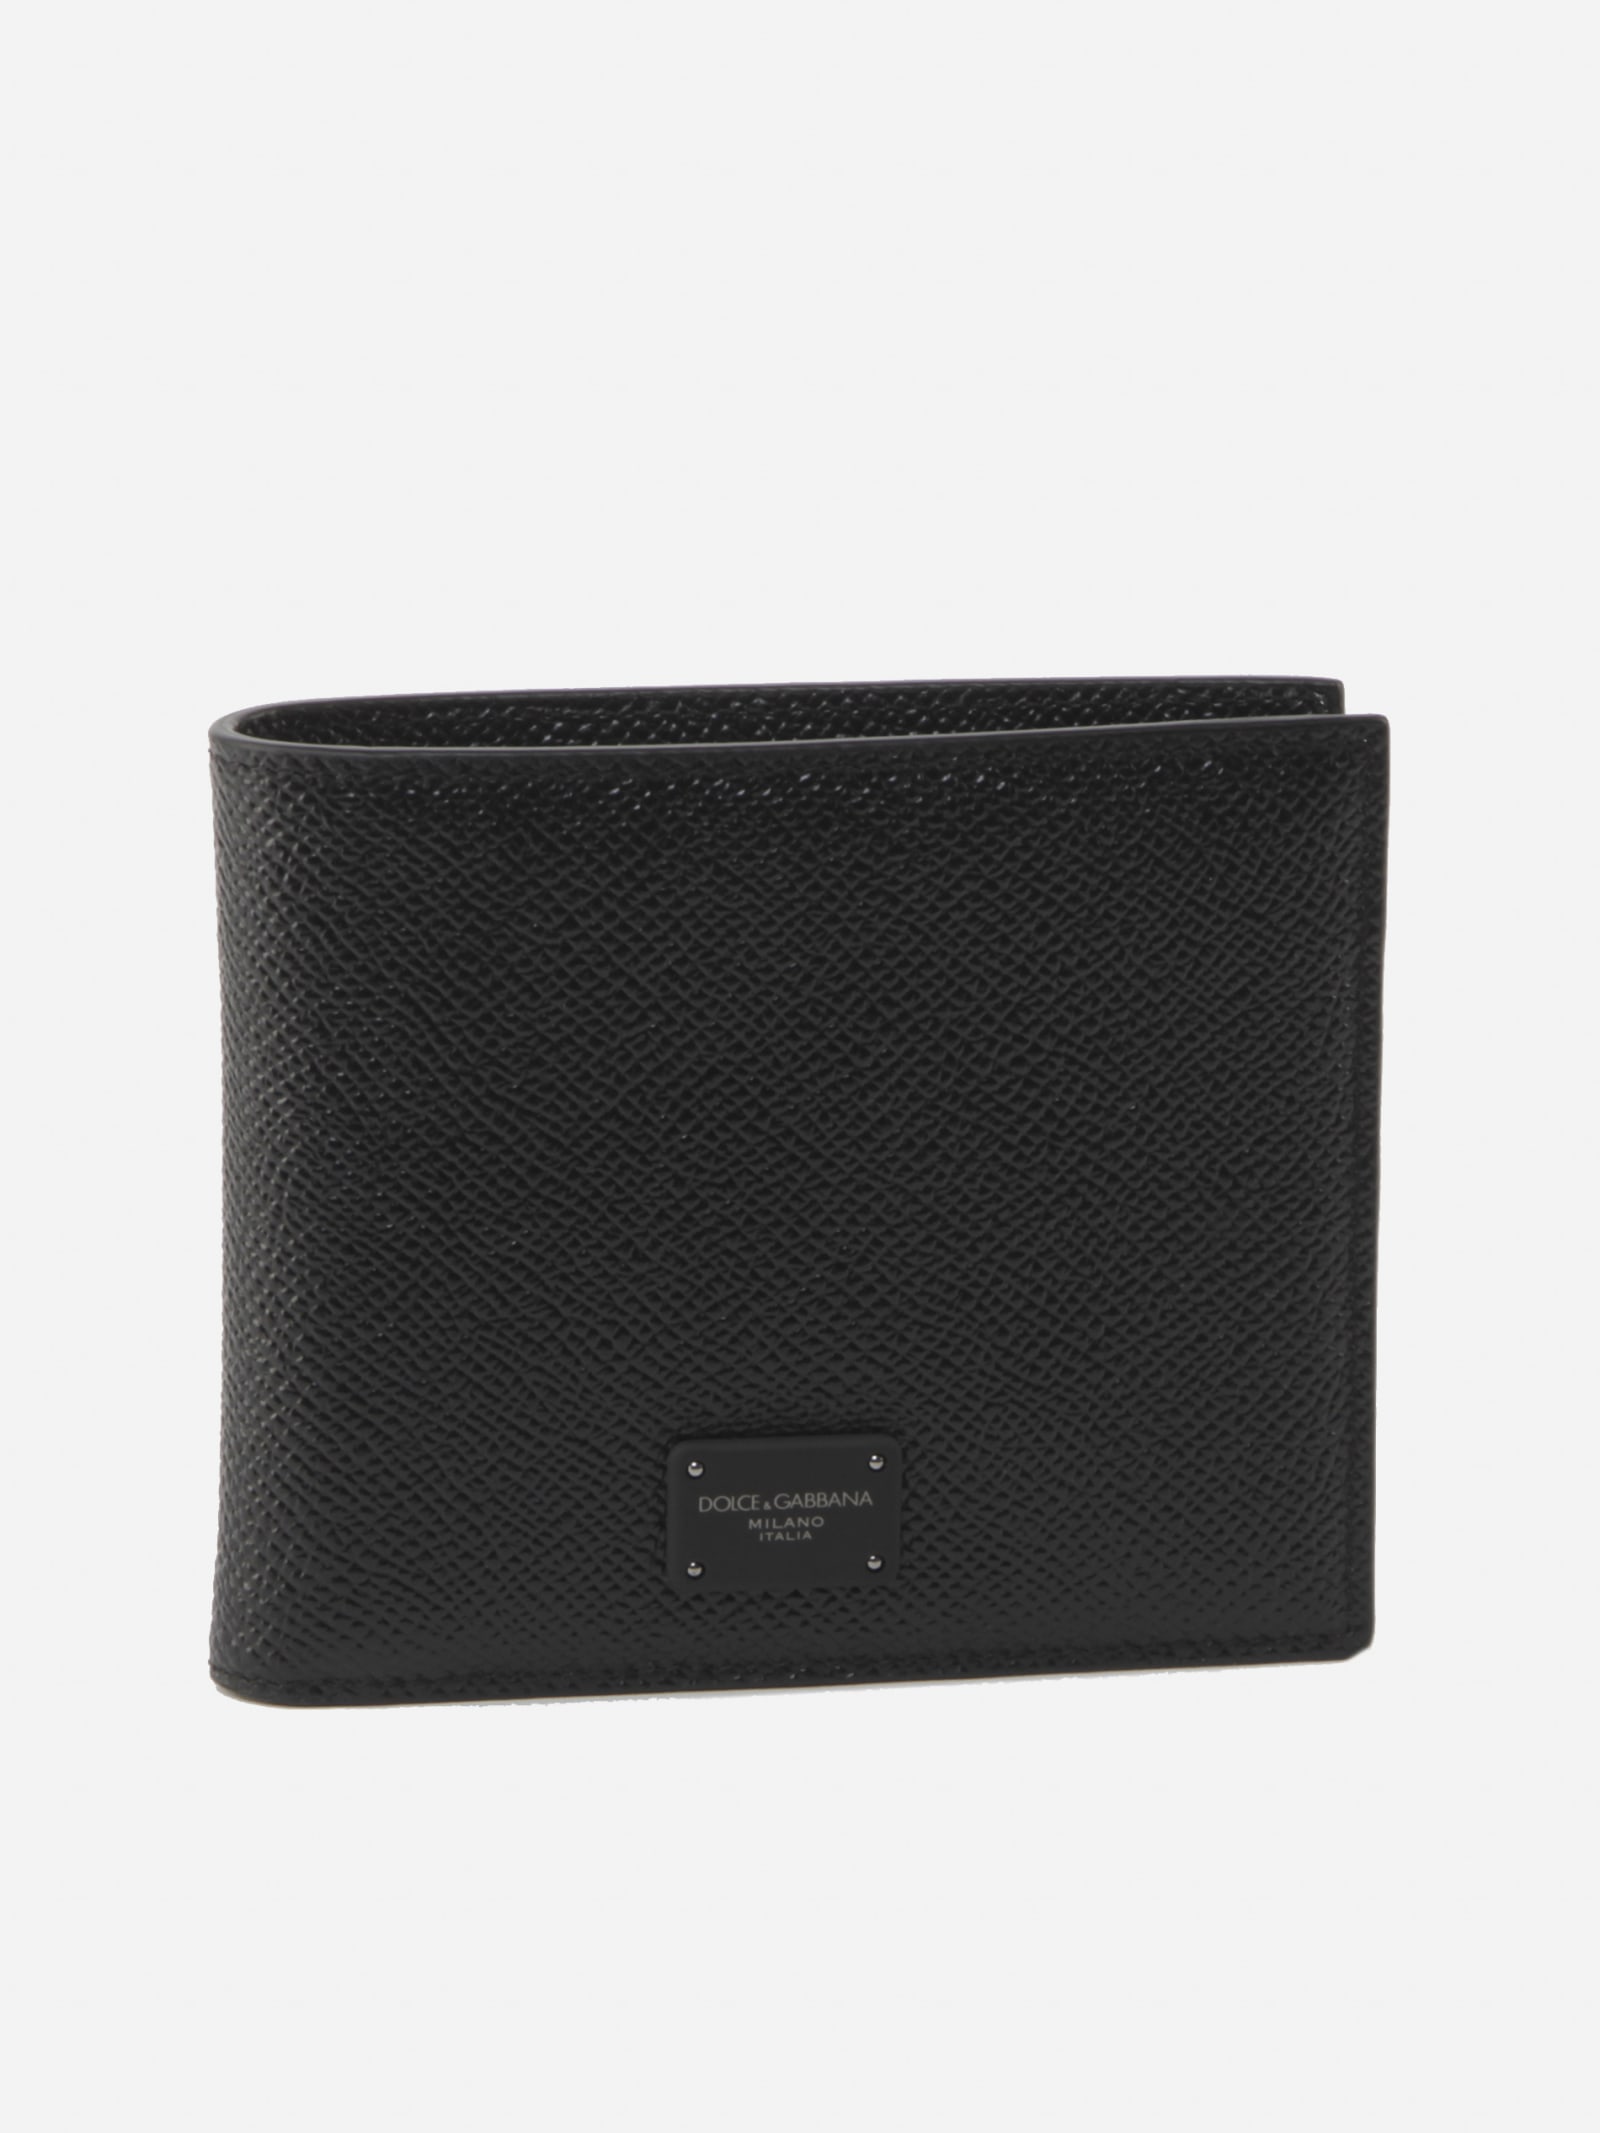 Dolce & Gabbana Black Wallet In Textured Leather